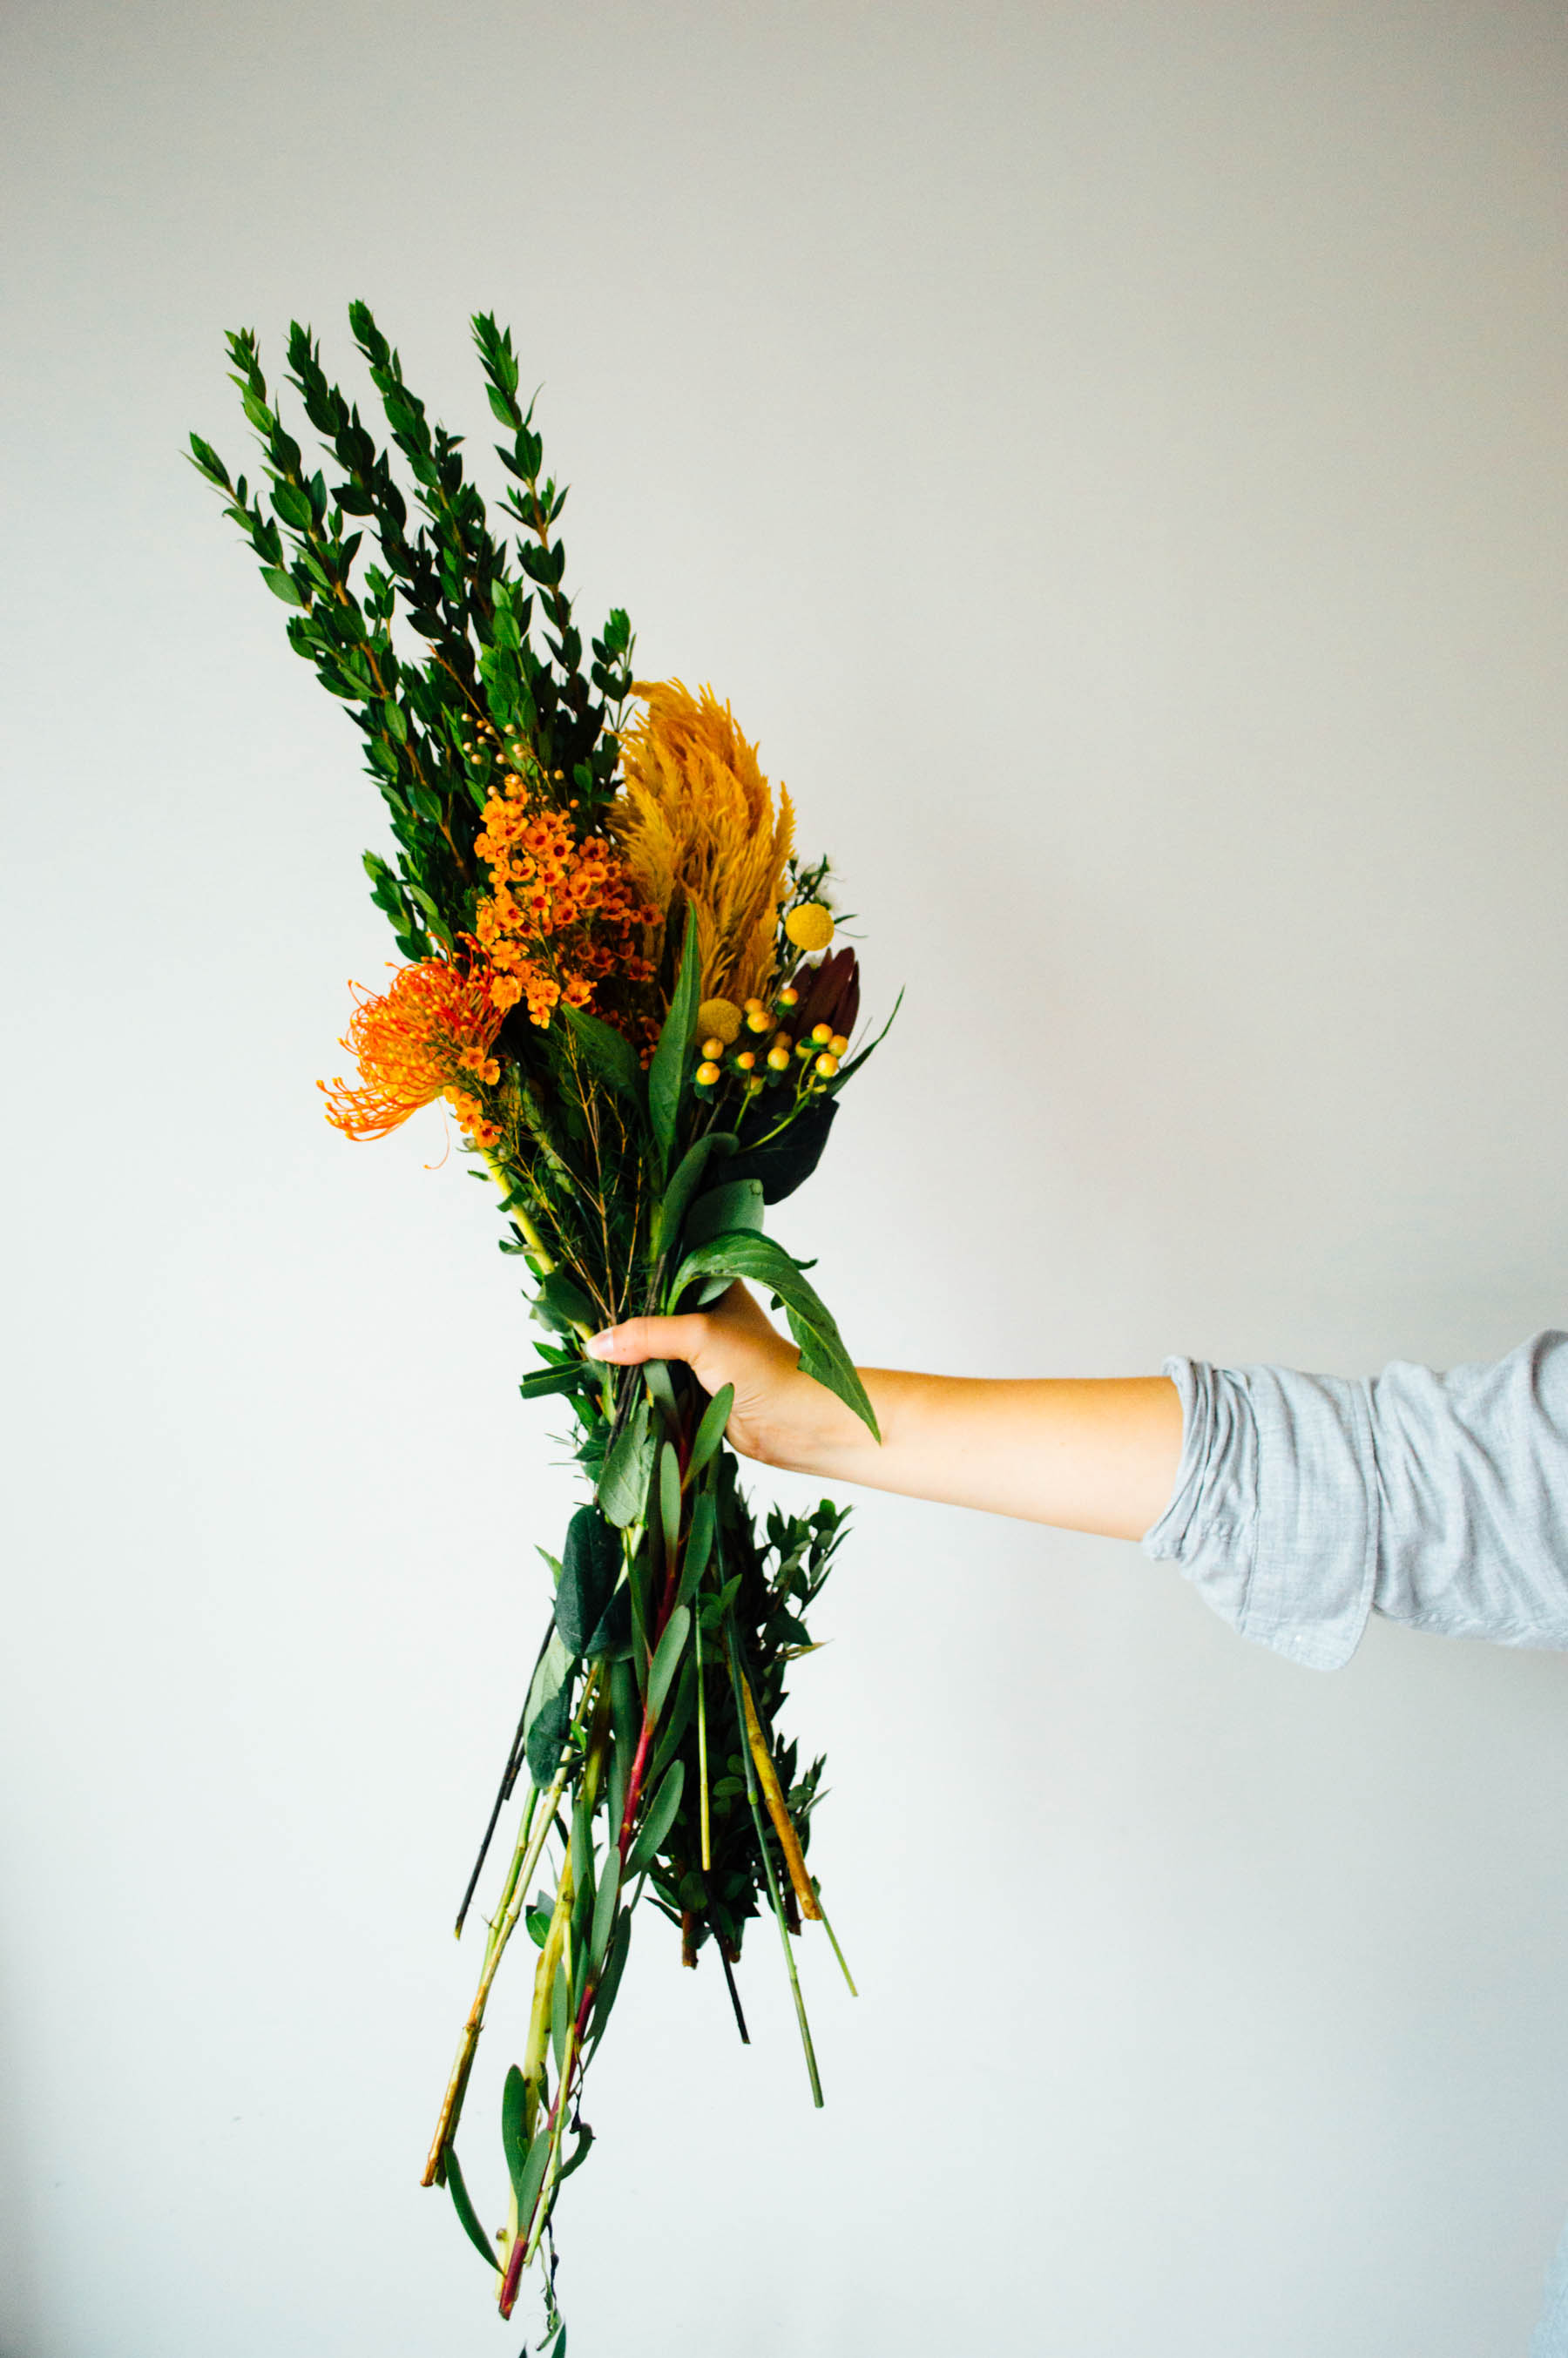 A stunning autumn-inspired floral arrangement with lush greens, bright yellows, and rich oranges | bygabriella.co